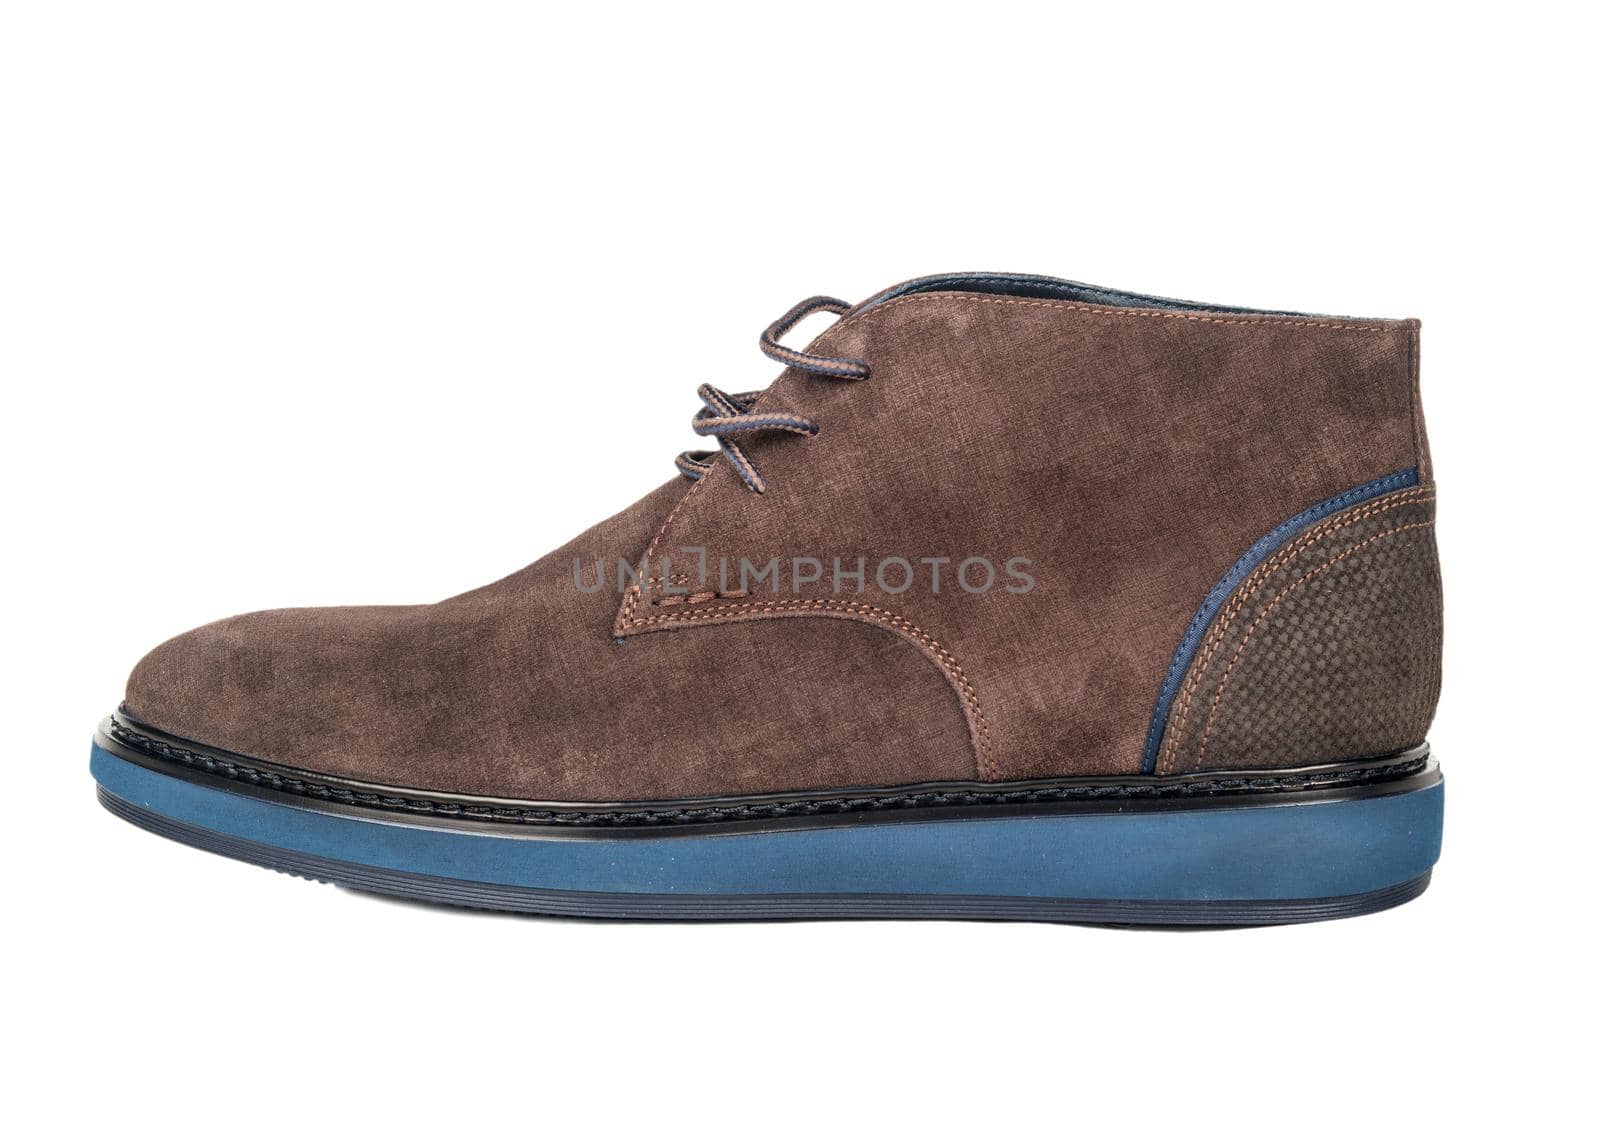 Mens brown suede shoes on white background